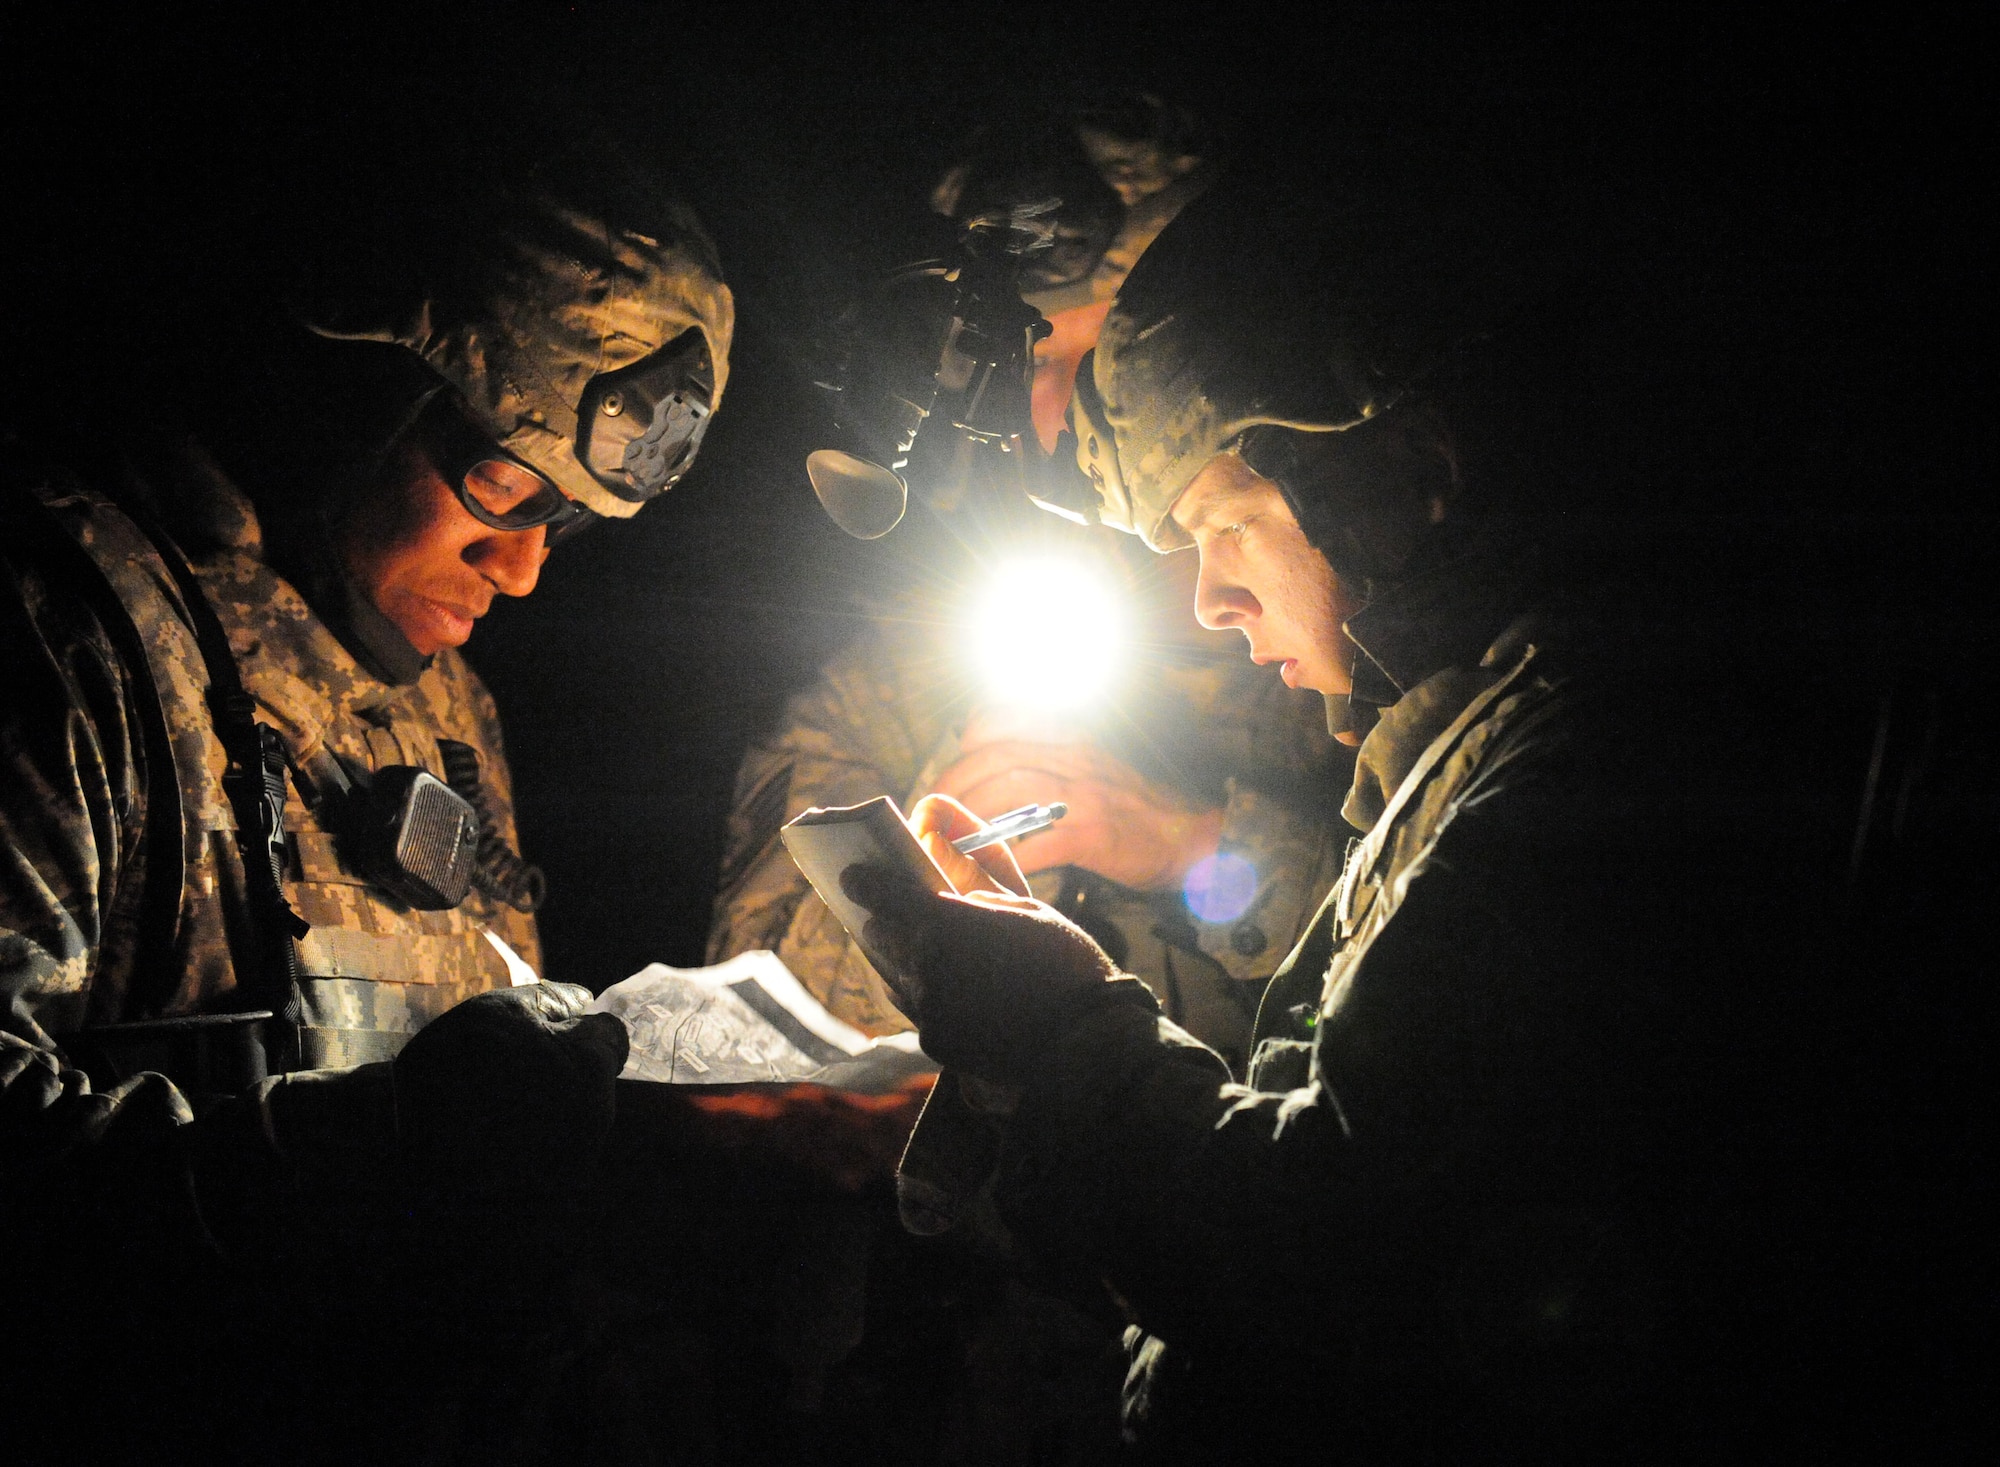 NEVADA TEST AND TRAINING RANGE, Nev.-- Members of the 822nd Base Defense Squadron write down a description of weapons found in a cache March 15, 2011. This first-ever DESERT EAGLE exercise lasted 54 consecutive hours, during which more than 250 American and British Airmen worked in unison to protect Al Zubya Air Base against a series of hostile threats. (U.S. Air Force photo/Senior Airman Stephanie Mancha)(RELEASED)